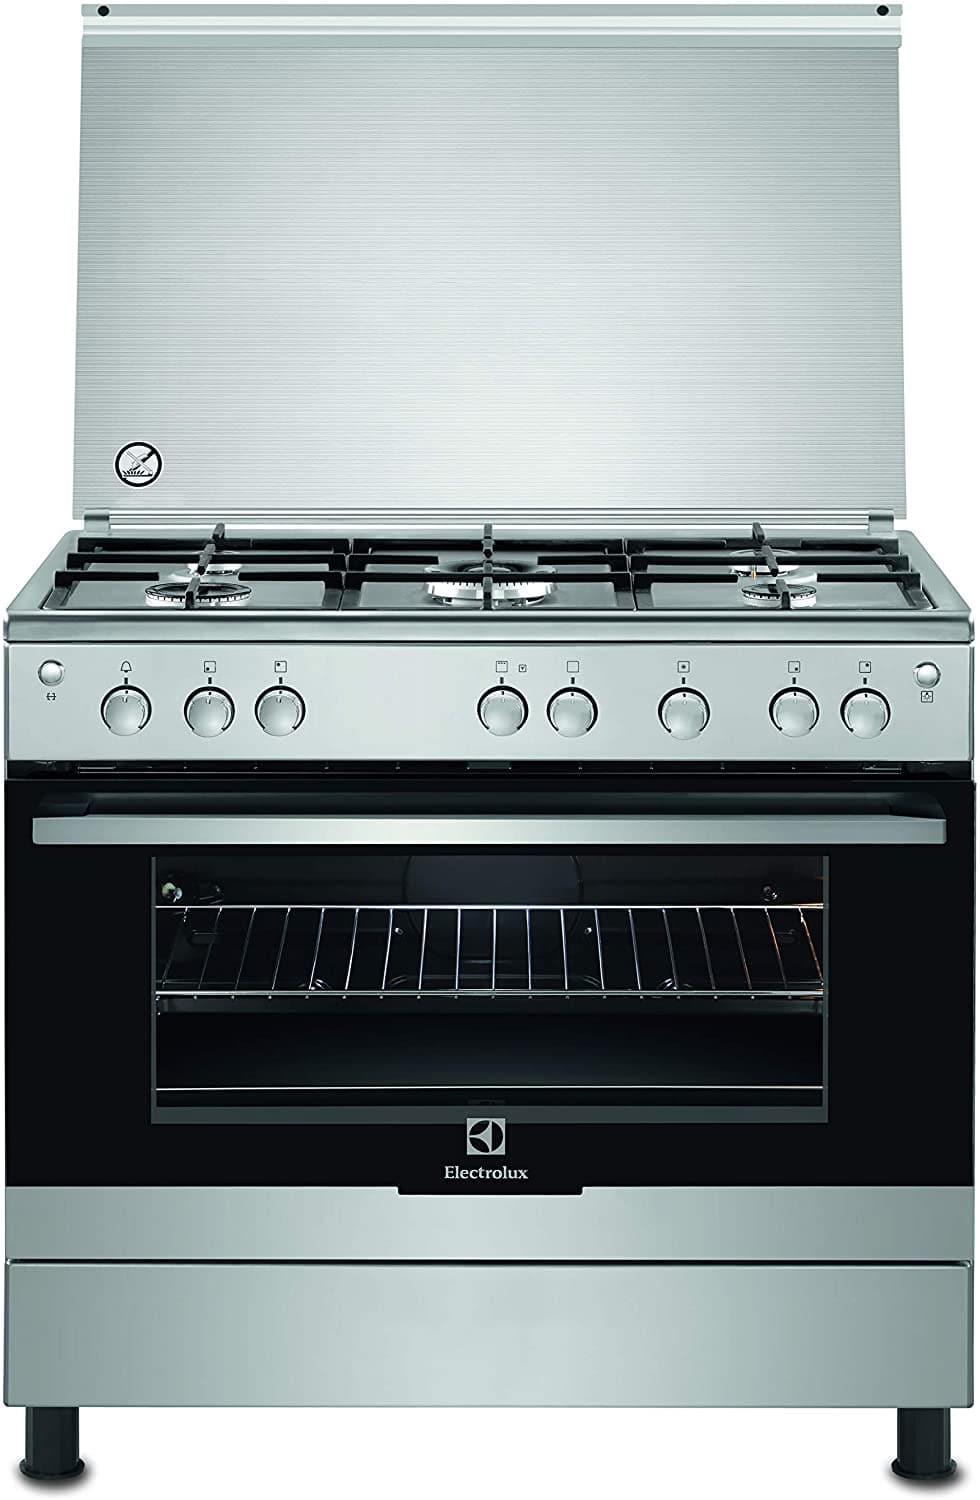 Electrolux ELUX 90X60 FULL GAS WITH TURNSPITCAST IRON PAN SUPPORTSBRUSHED STEEL COLOR.-EKG912A1OX - Jashanmal Home